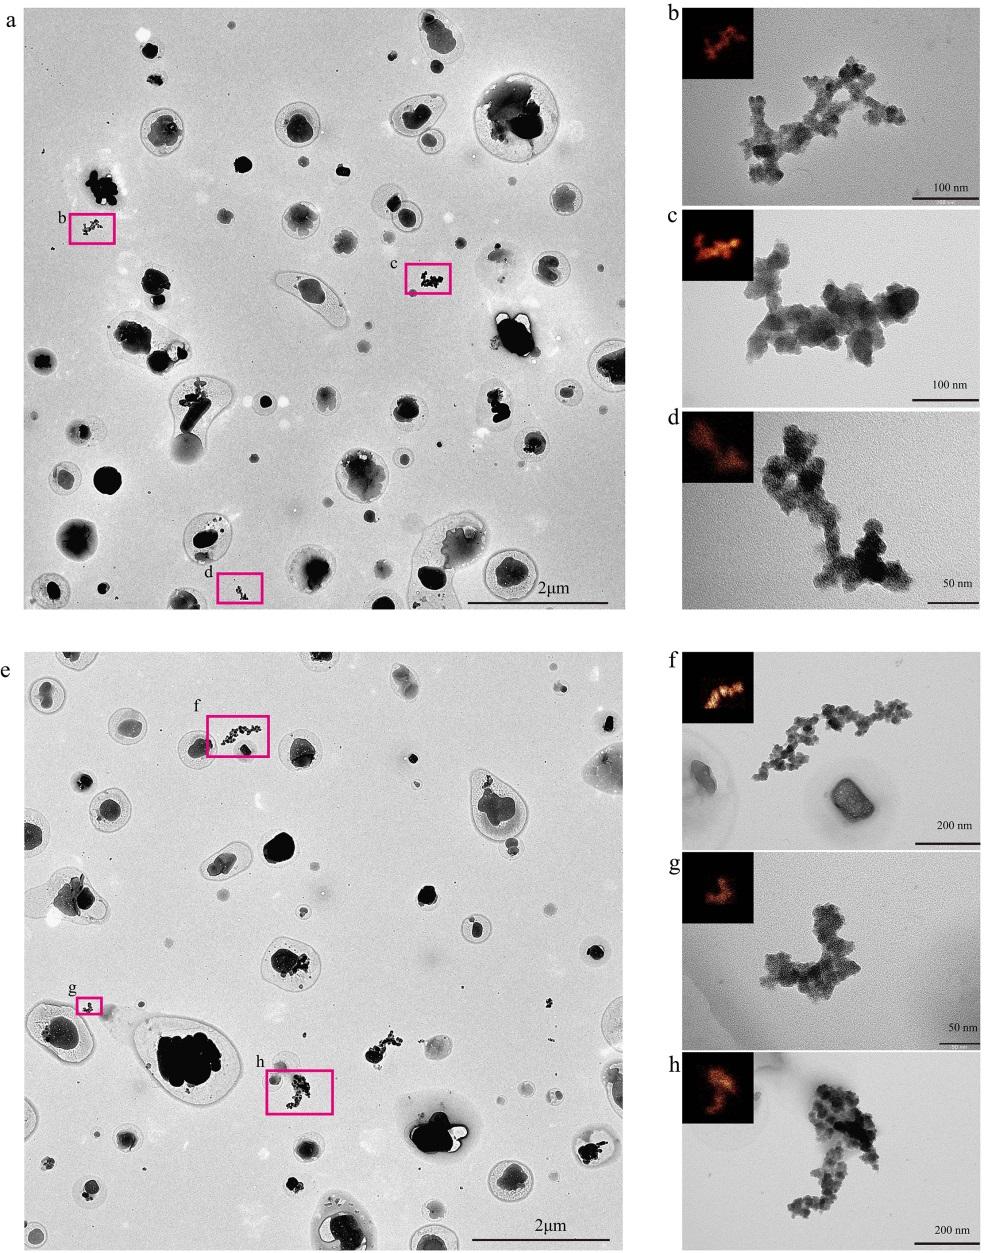 Supplementary Figure 2. Transmission electron microscopy (TEM) images of aggregated FeO x nanoparticles found in dry PBL air.